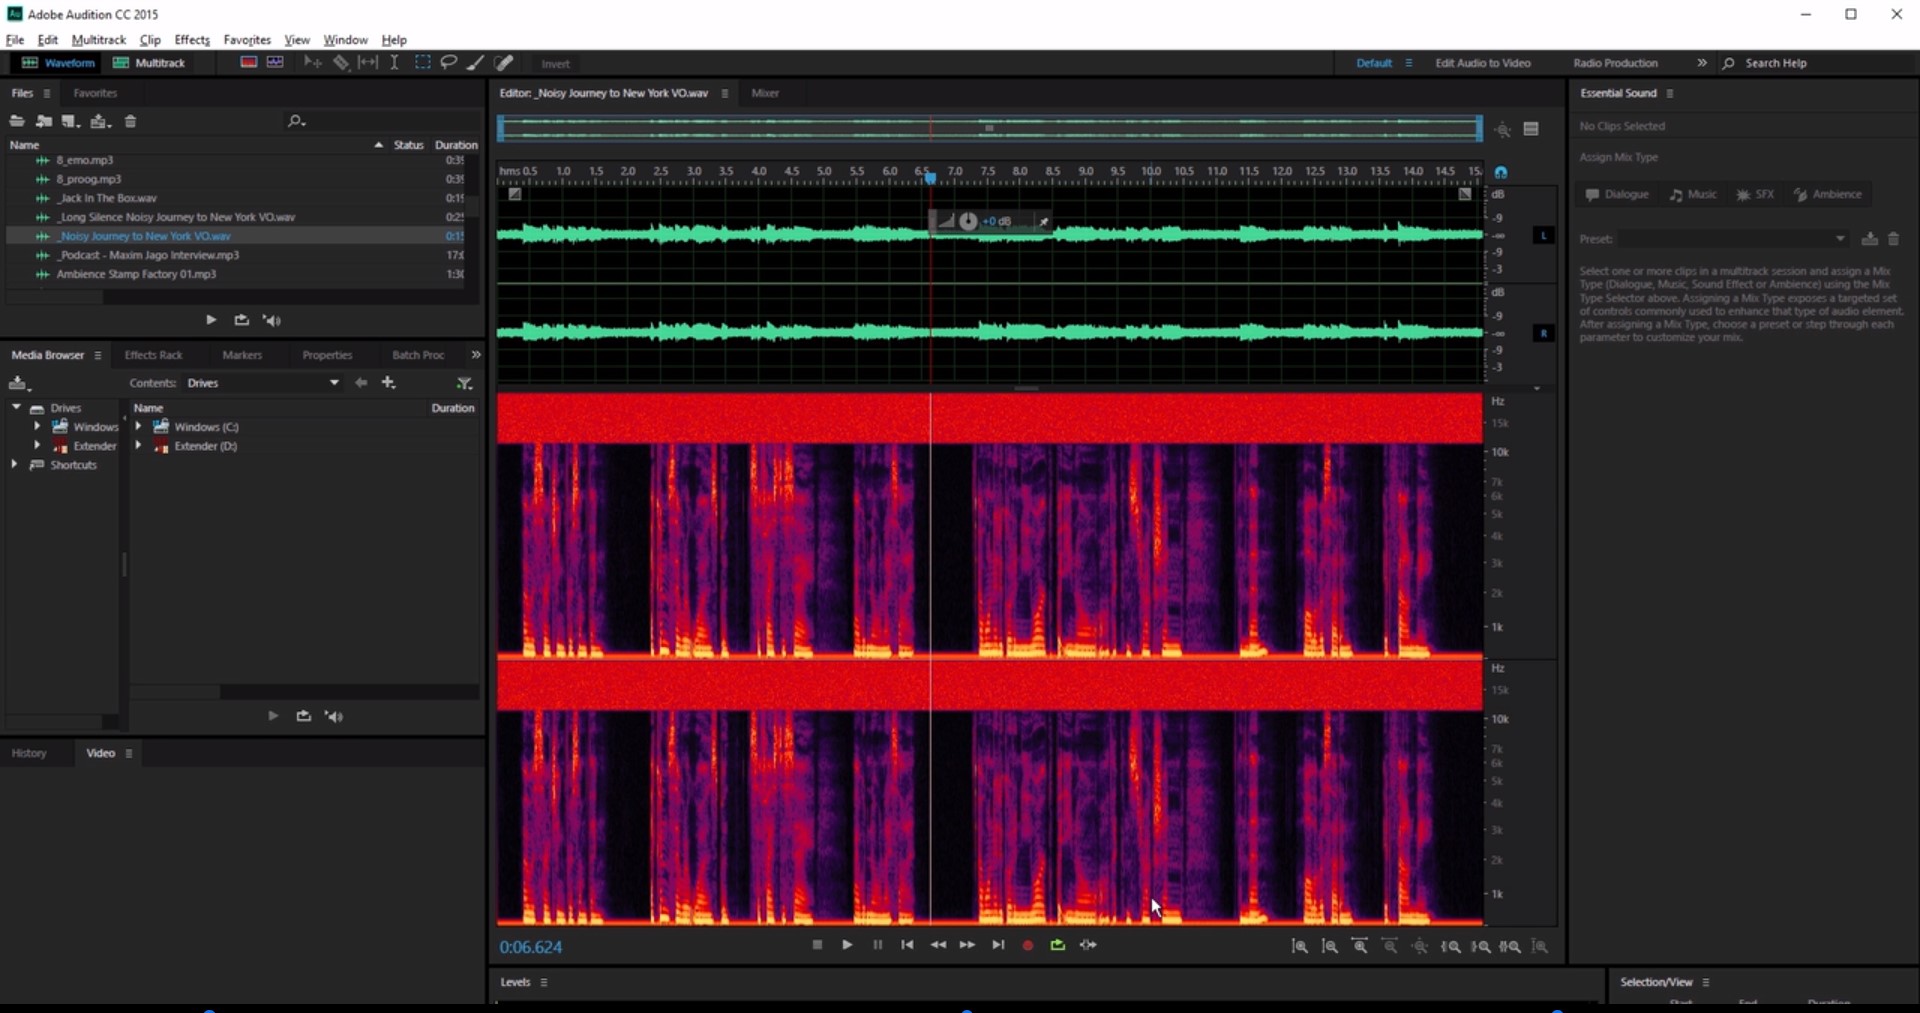 Adobe Audition Software - 2022 Reviews, Pricing & Demo